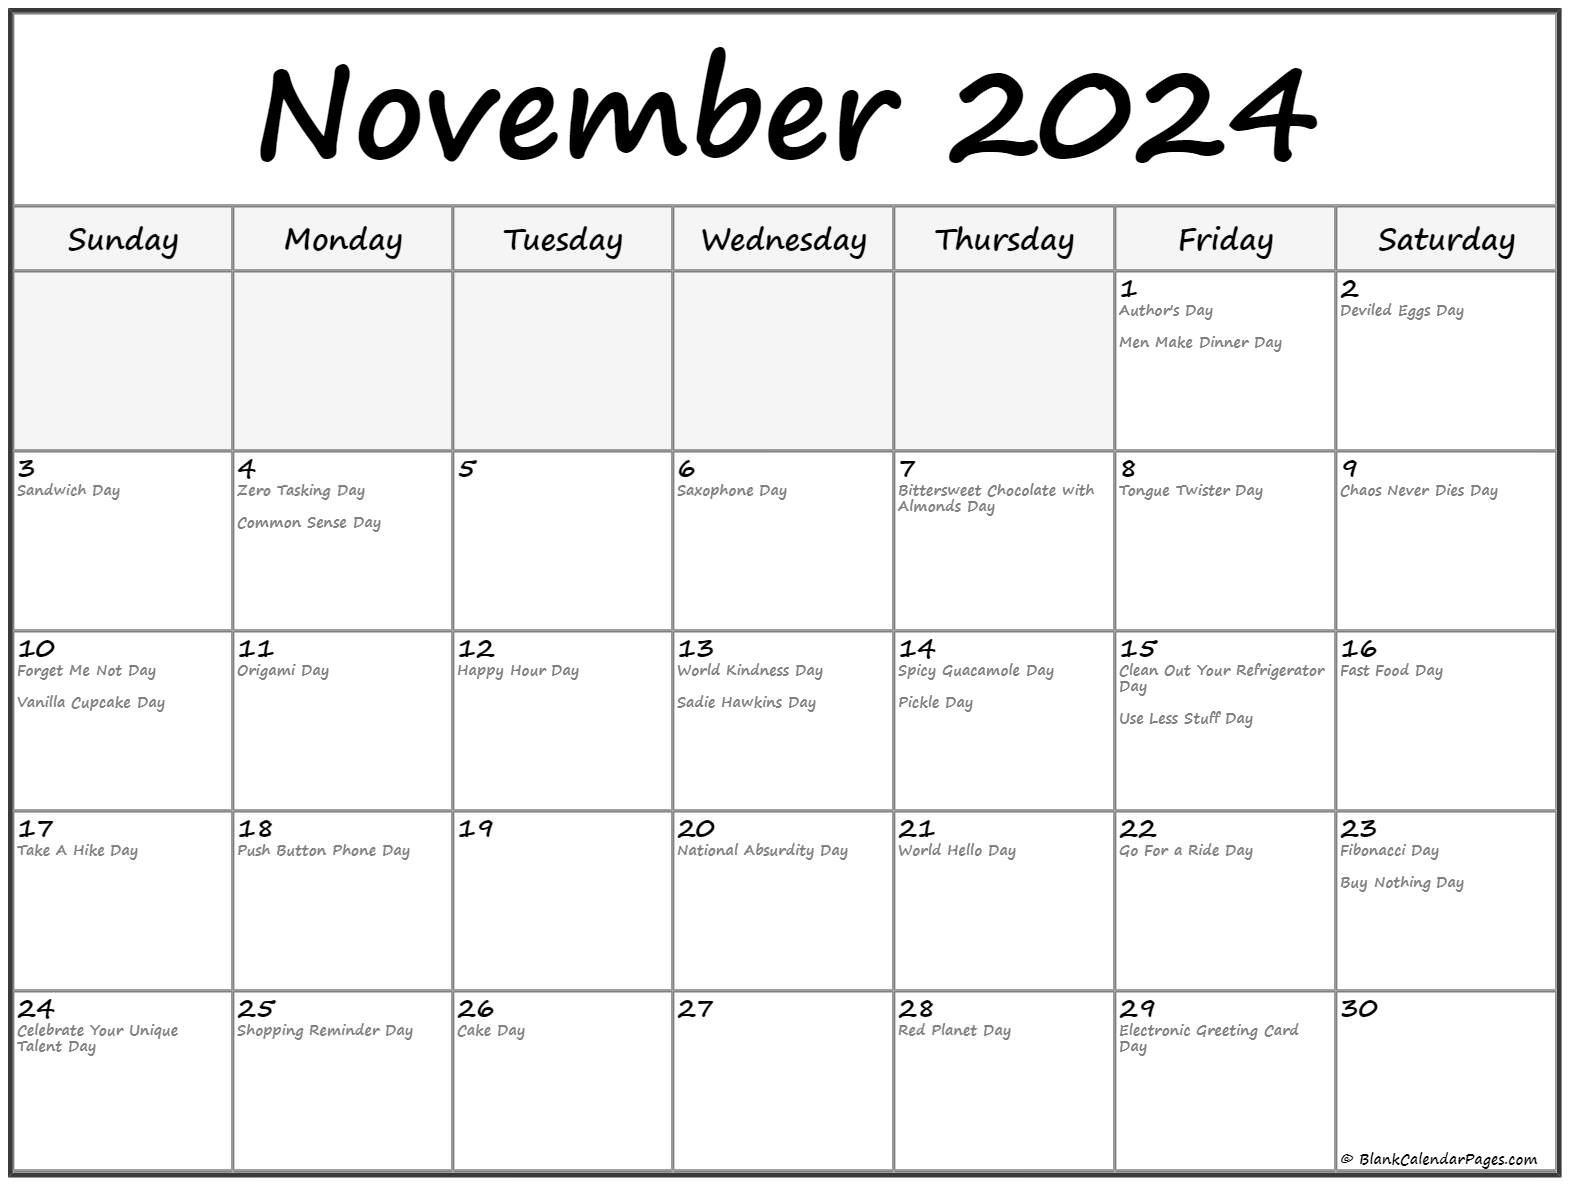 collection-of-november-2021-calendars-with-holidays